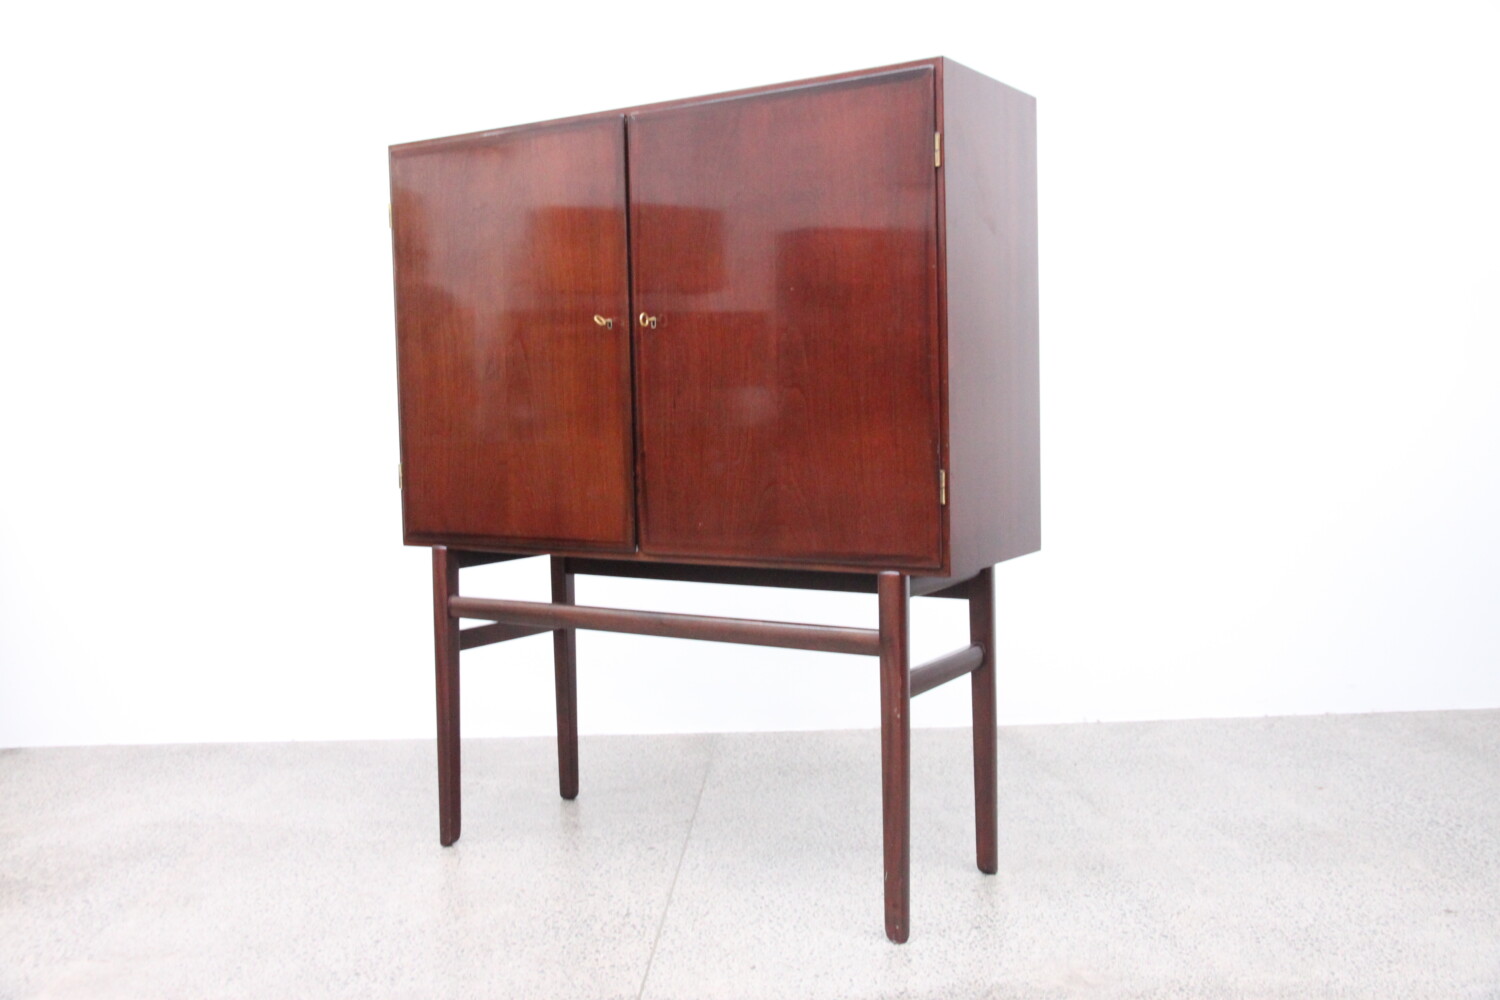 Cabinet by Ole Wanscher